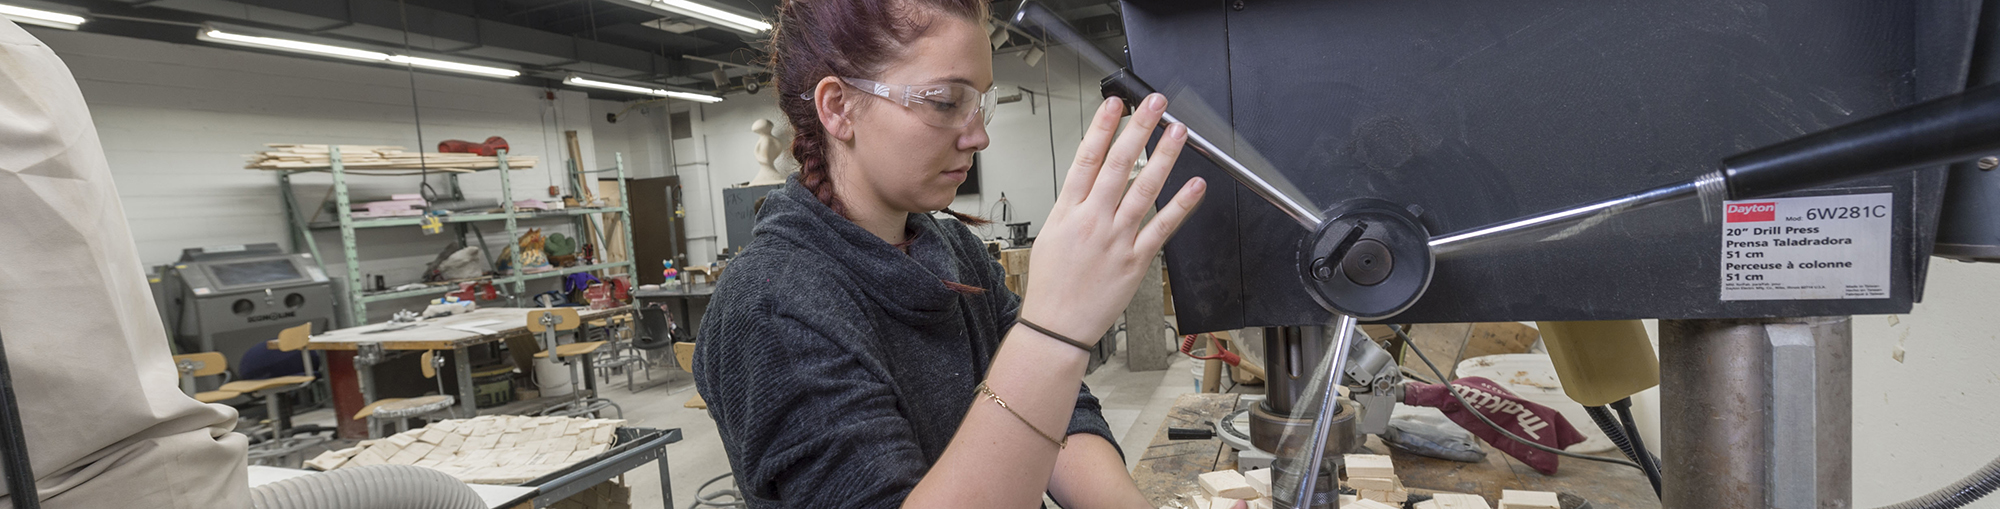 A student works in the sculpture studio.